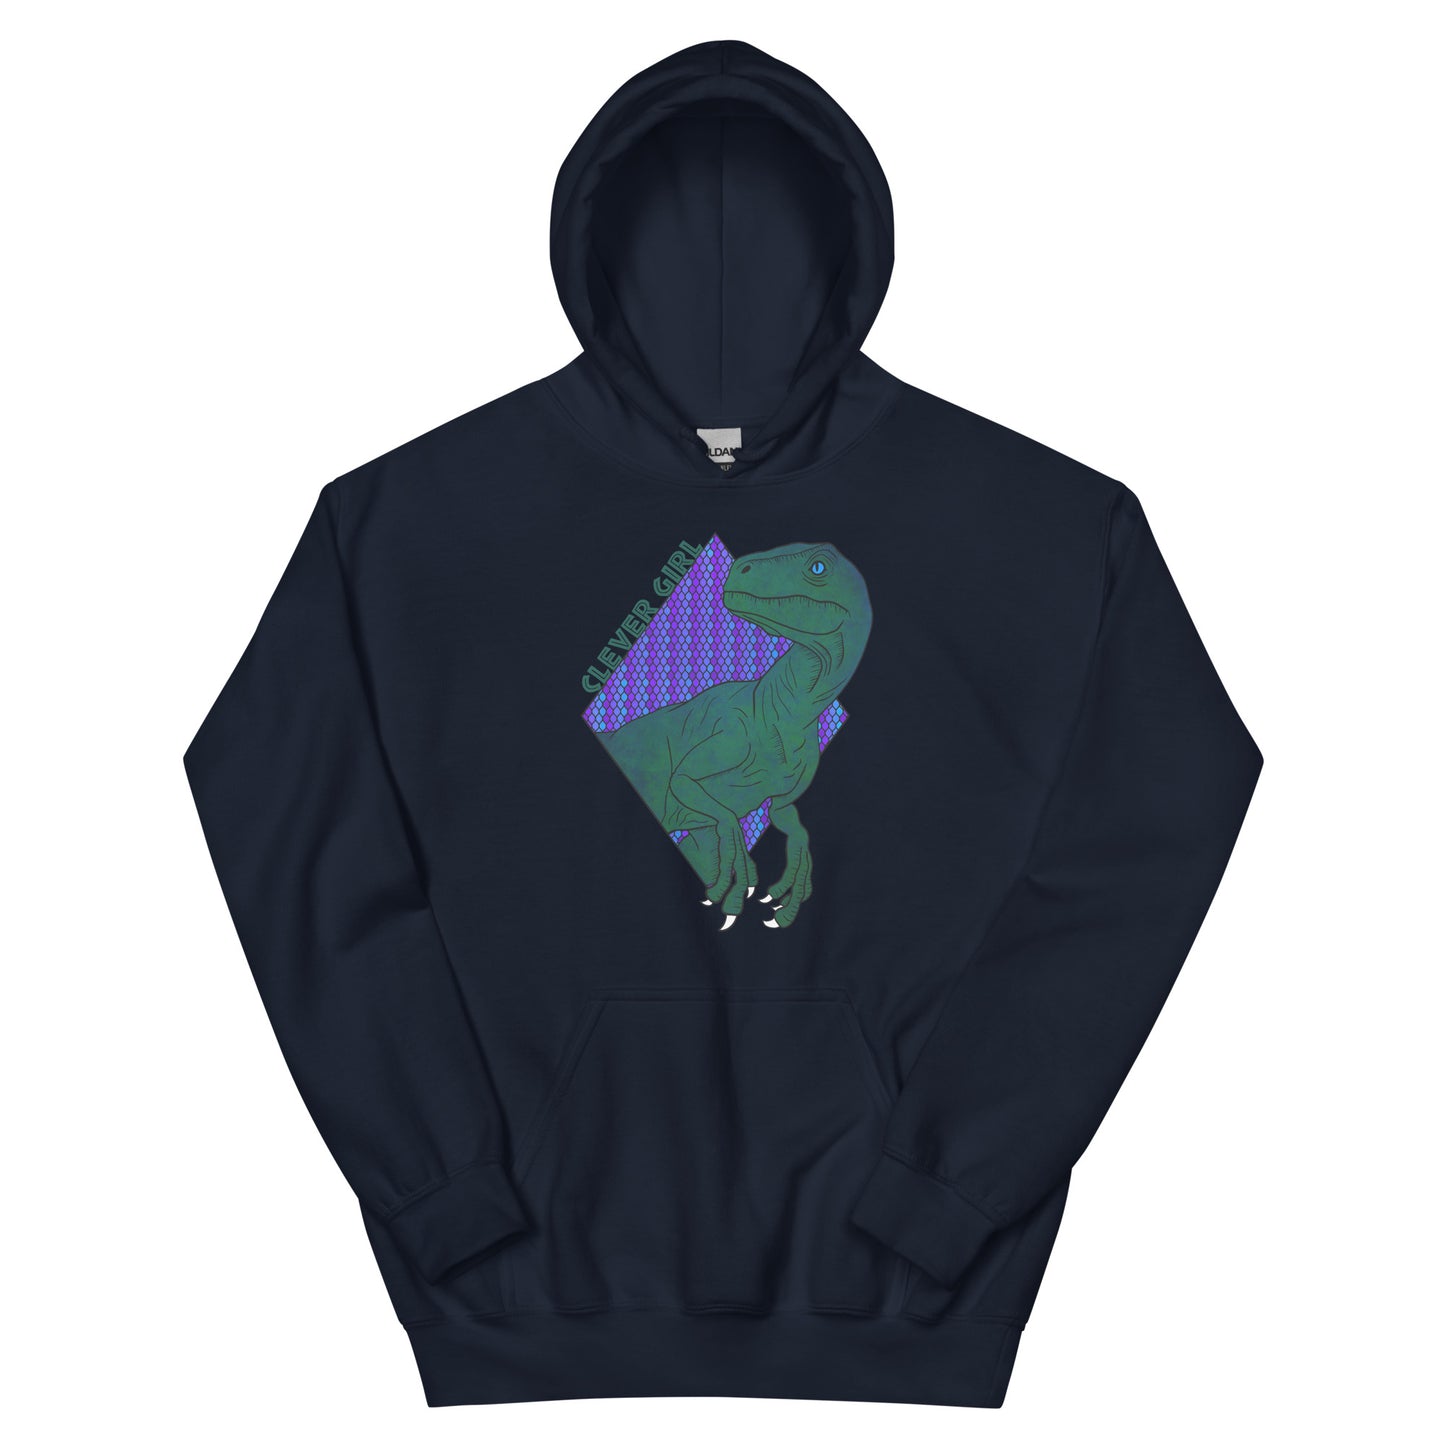 Green Clever Girl Unisex Hoodie